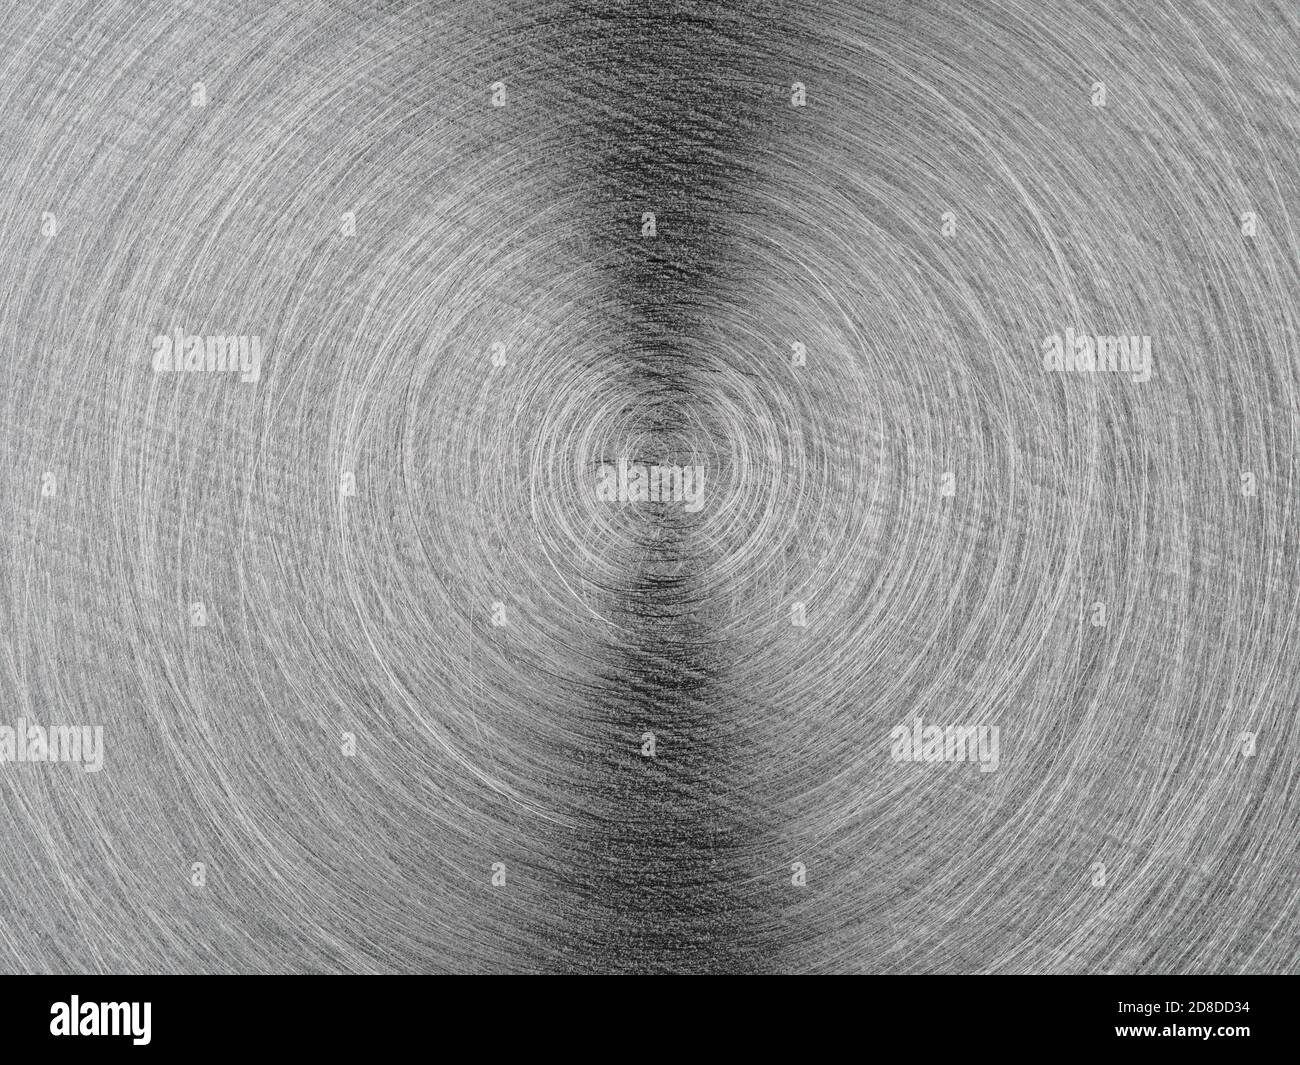 Circular brushed steel metal surface background, grained texture Stock Photo